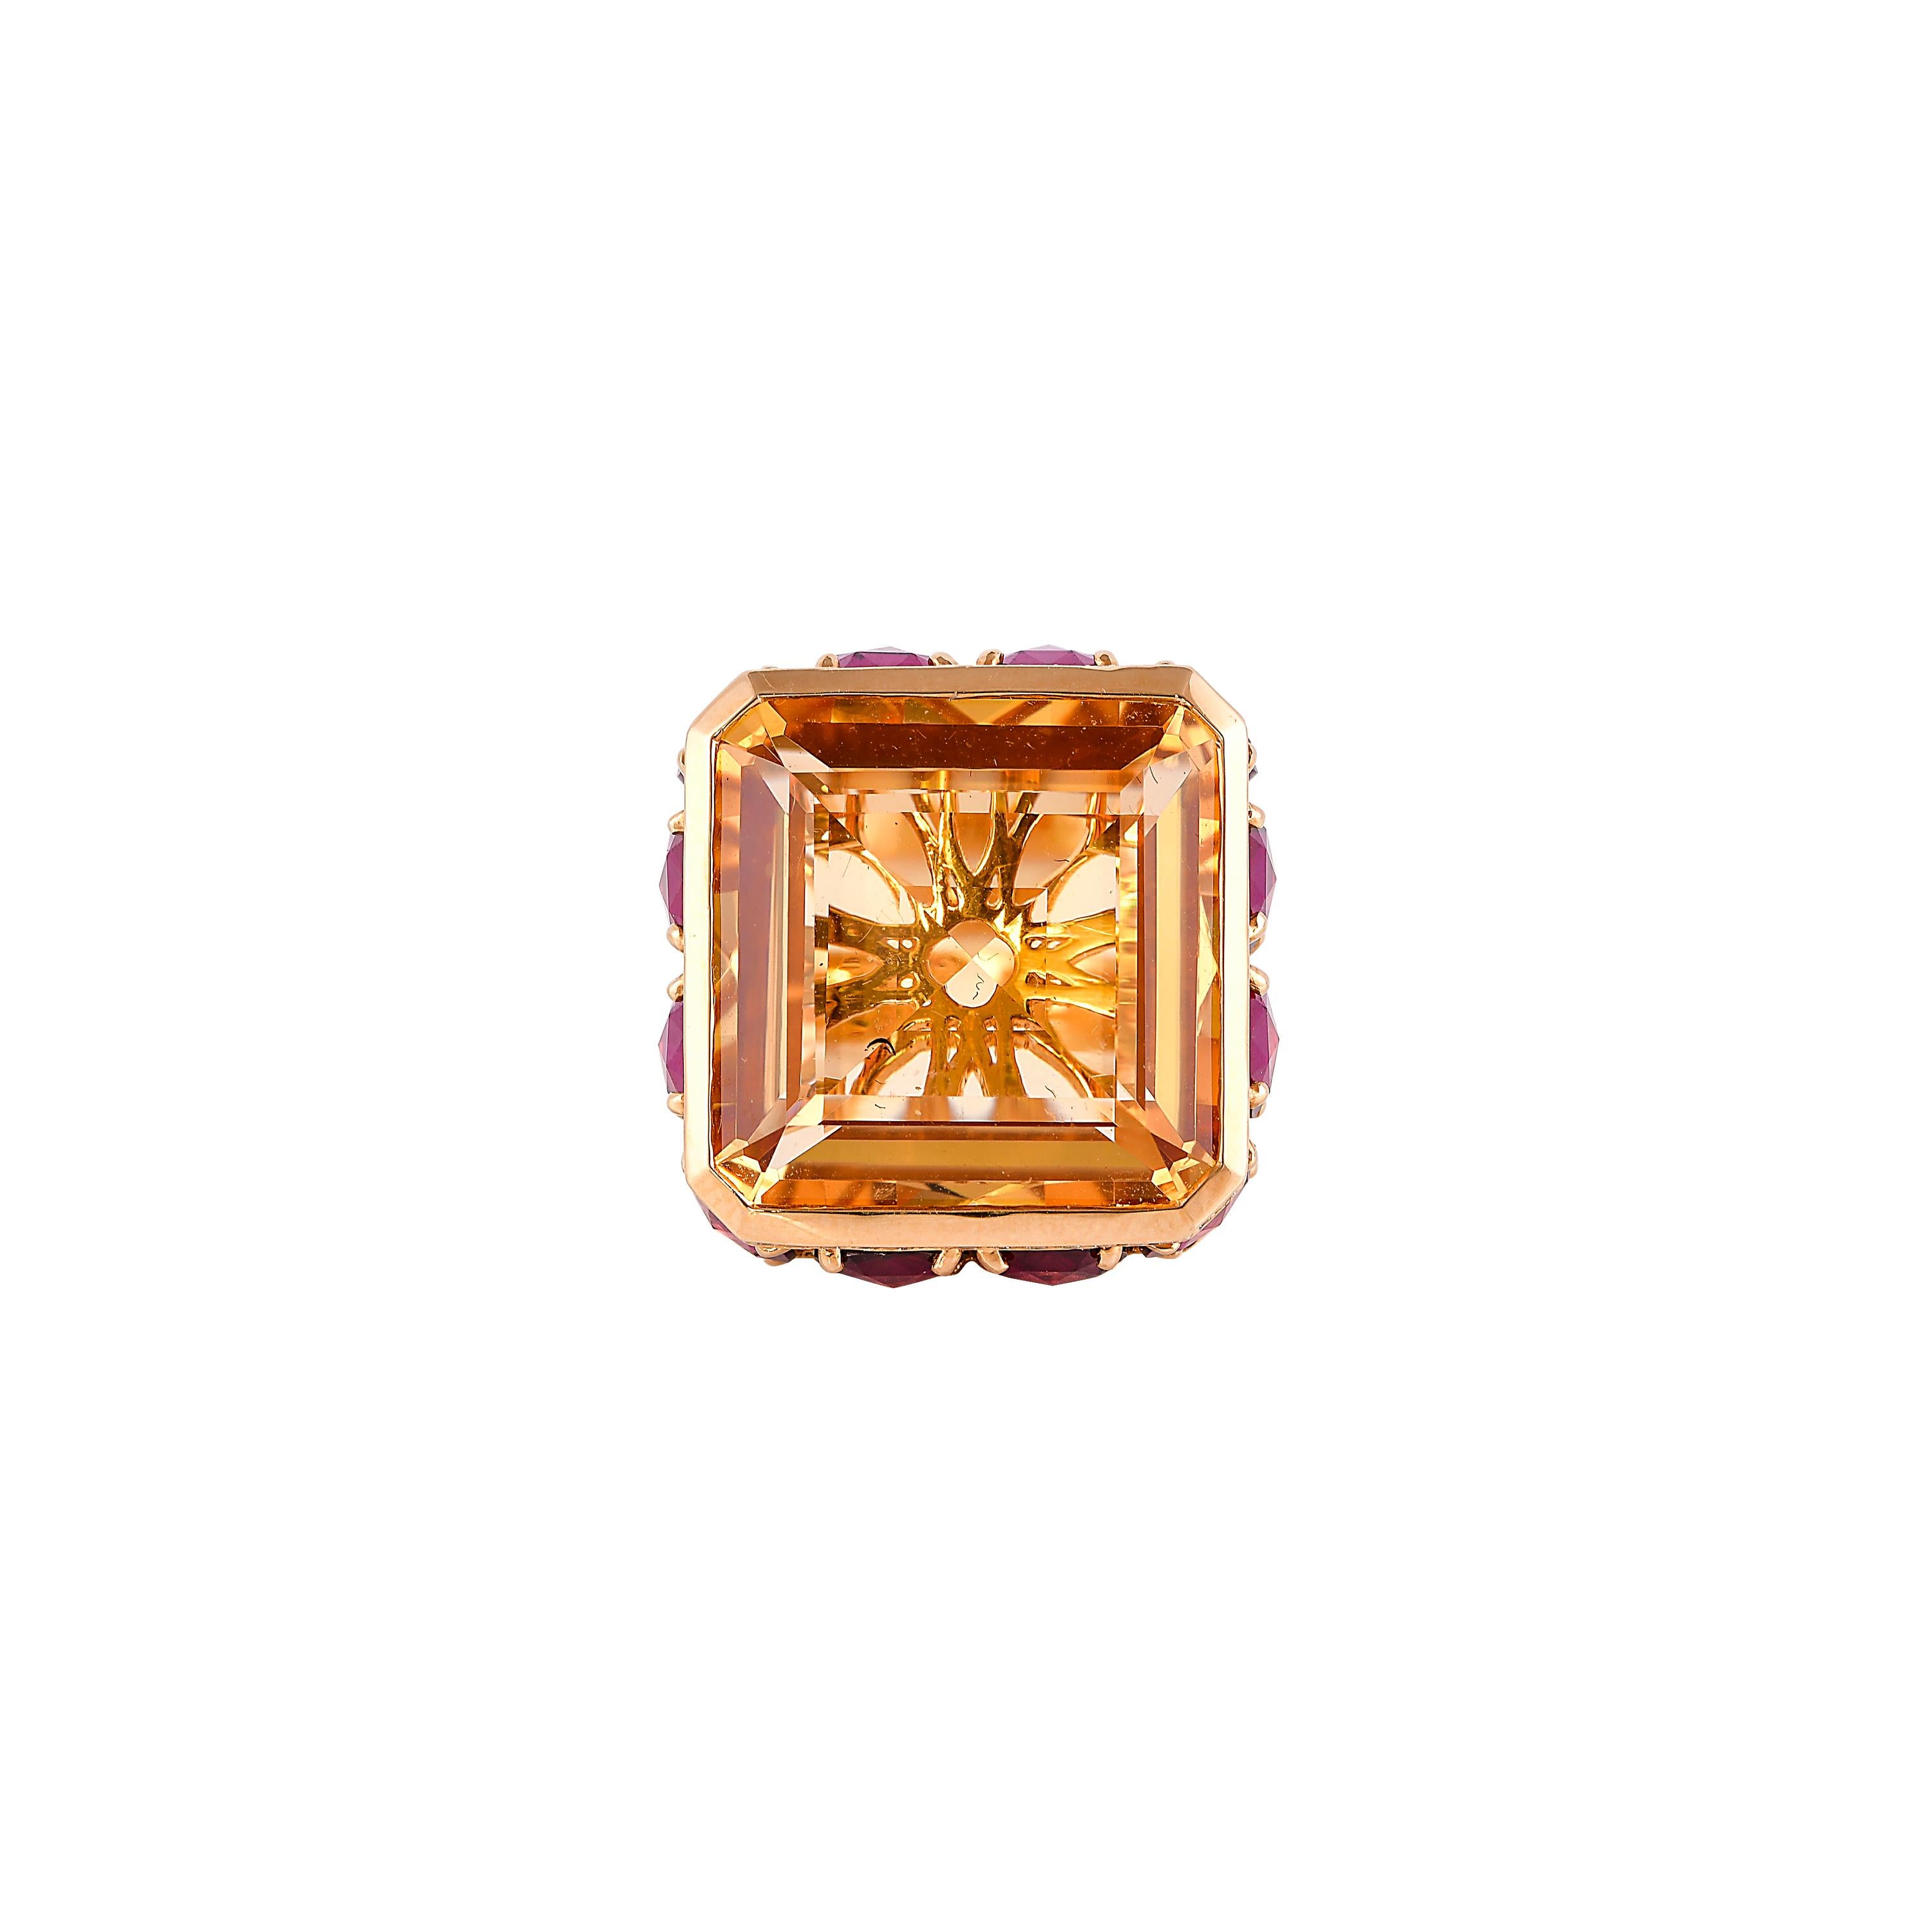 Sunita Nahata presents a stunning and regal 21 carat honey quartz cocktail ring. The stunning center stone vibrantly sits on top of a cluster of diamonds and radiant rhodolites. The unique architecture to construct and combine these gemstones makes